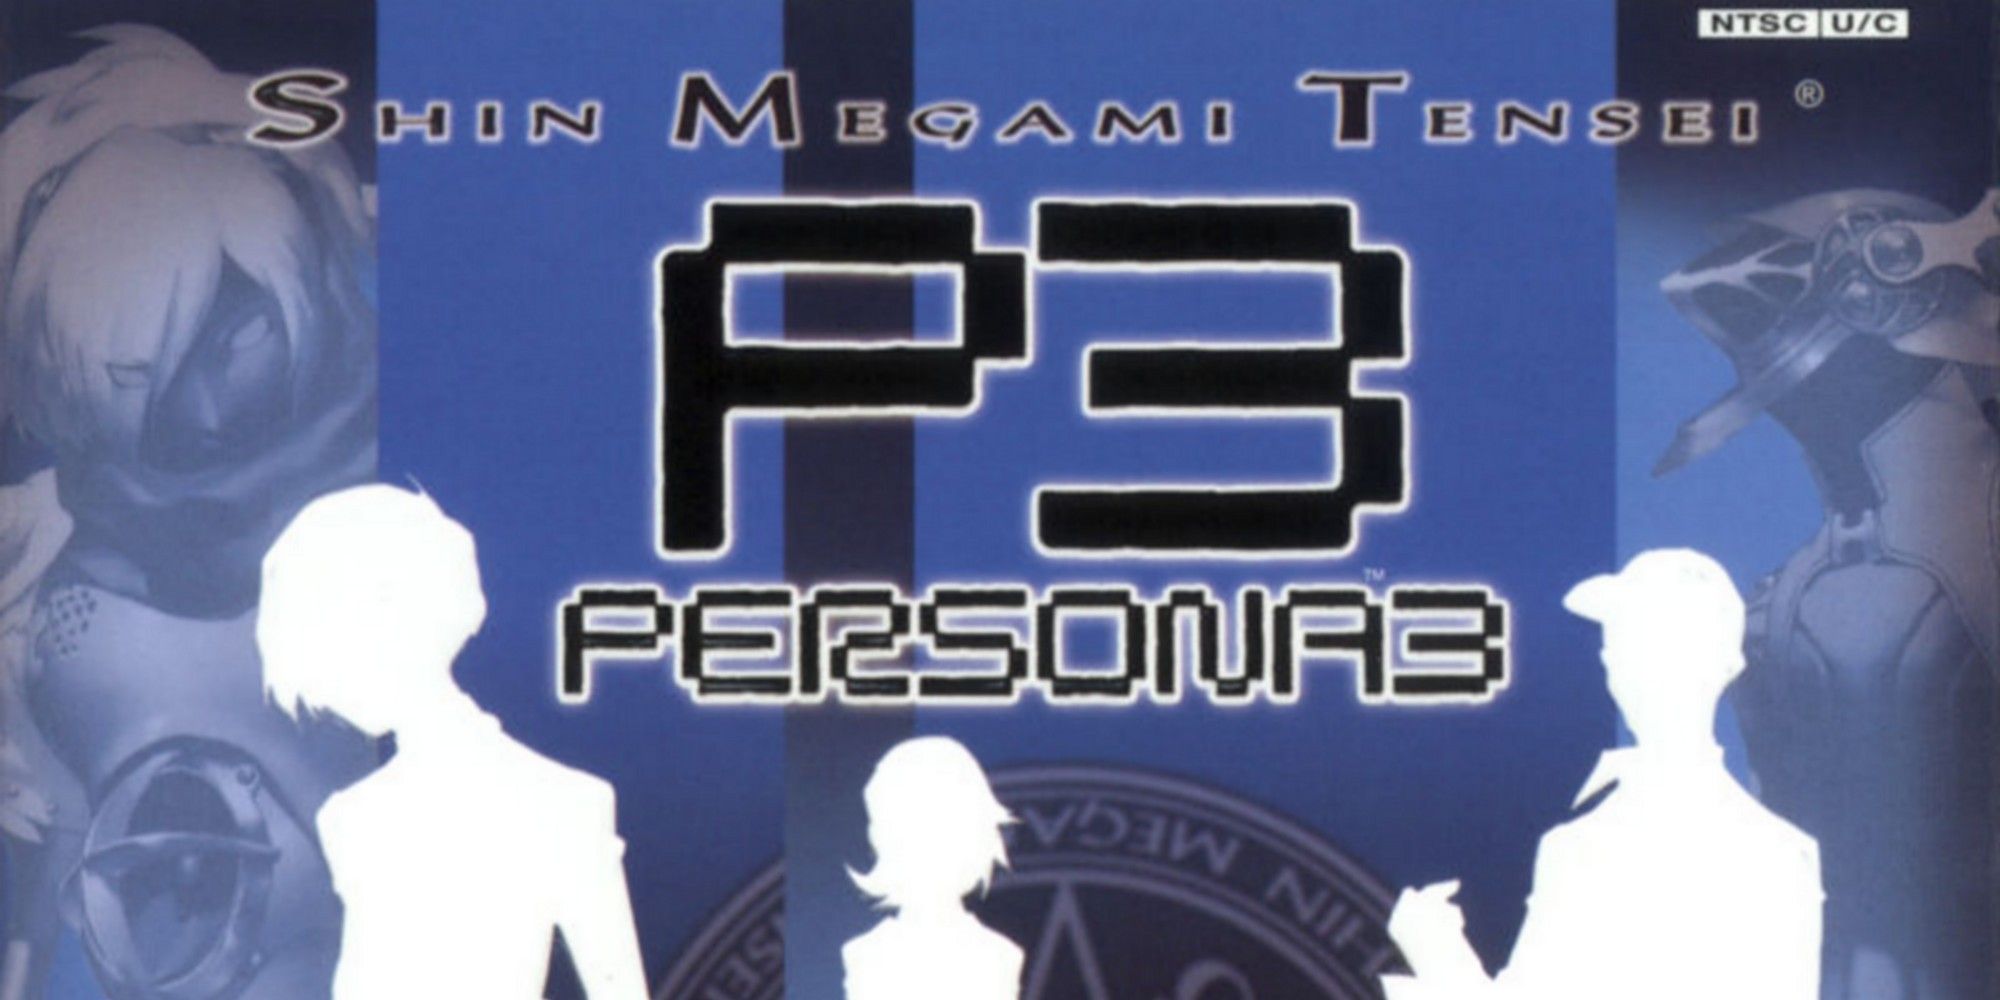 cover art for persona 3 featuring the male protagonist, yukari, and junpei in silhouette